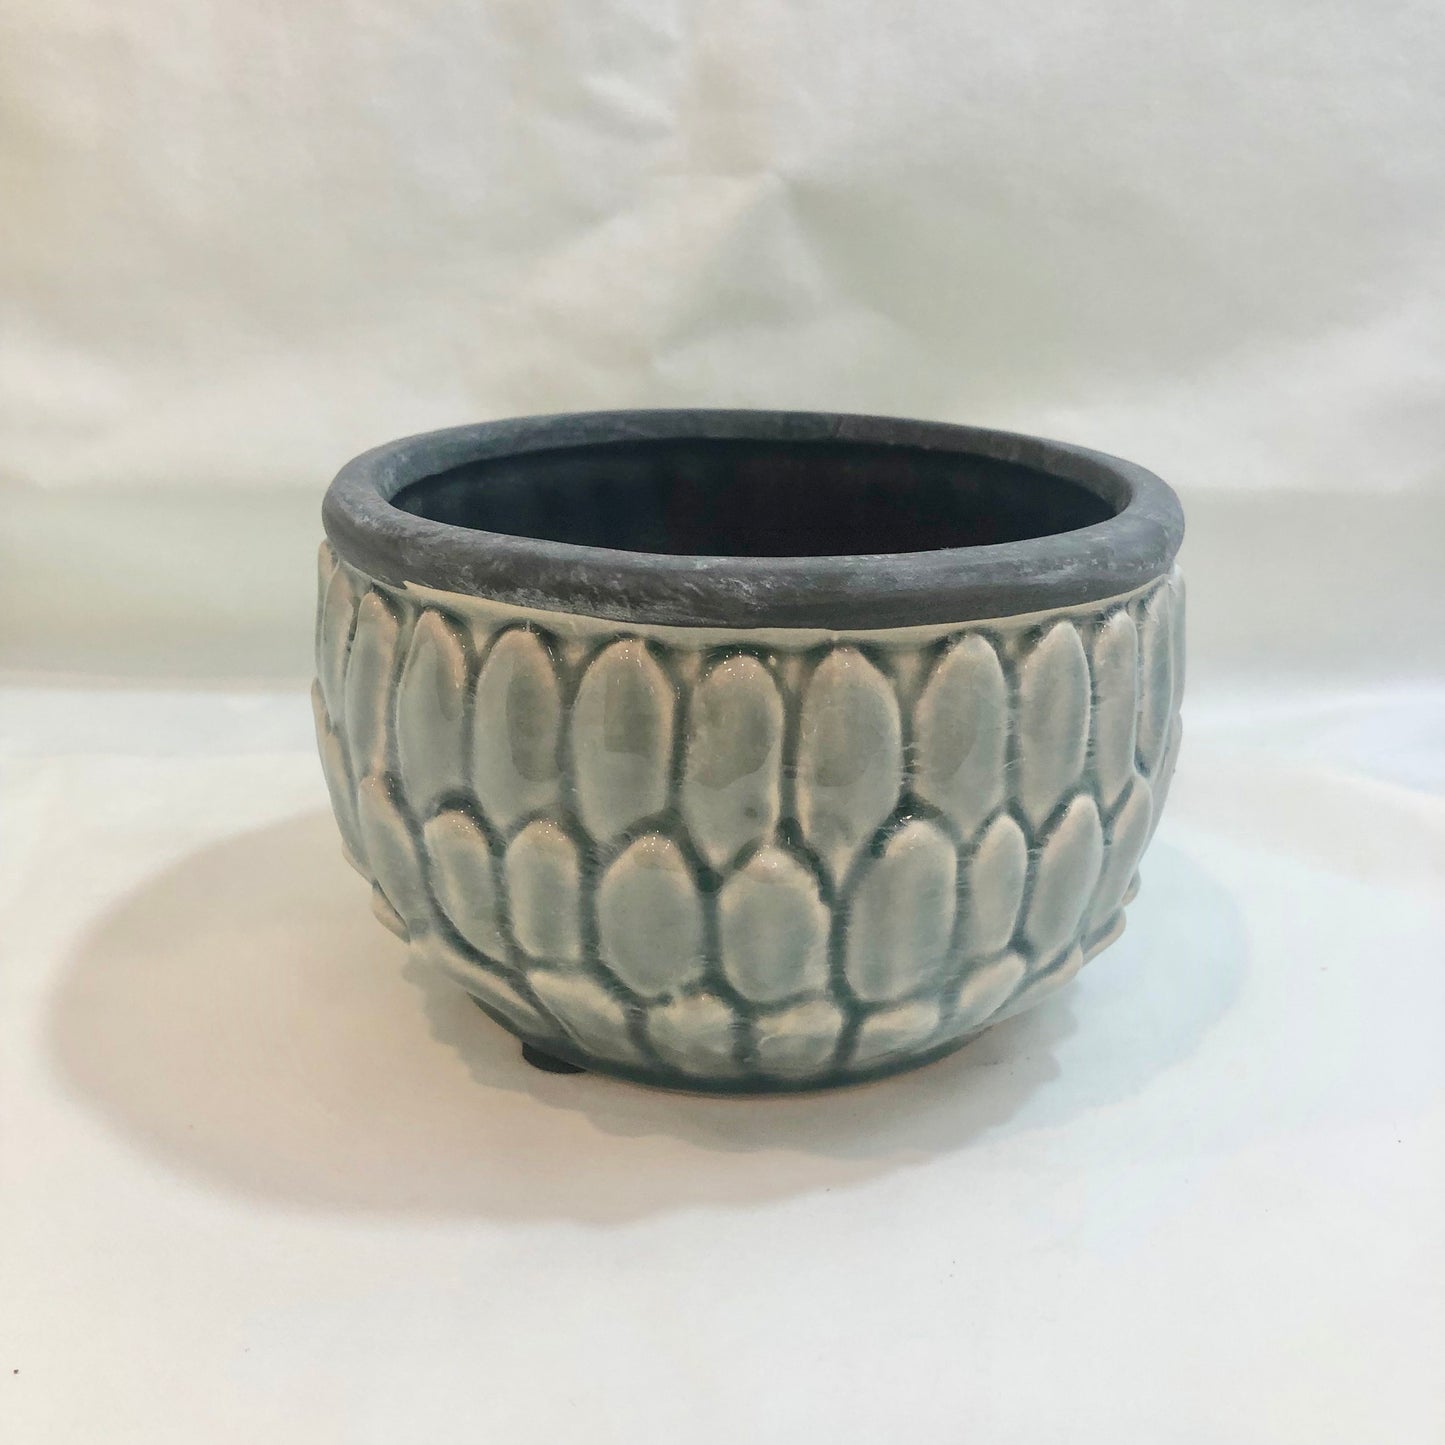 Pot, Blue-gray Ceramic with Overlapping Leaf Design